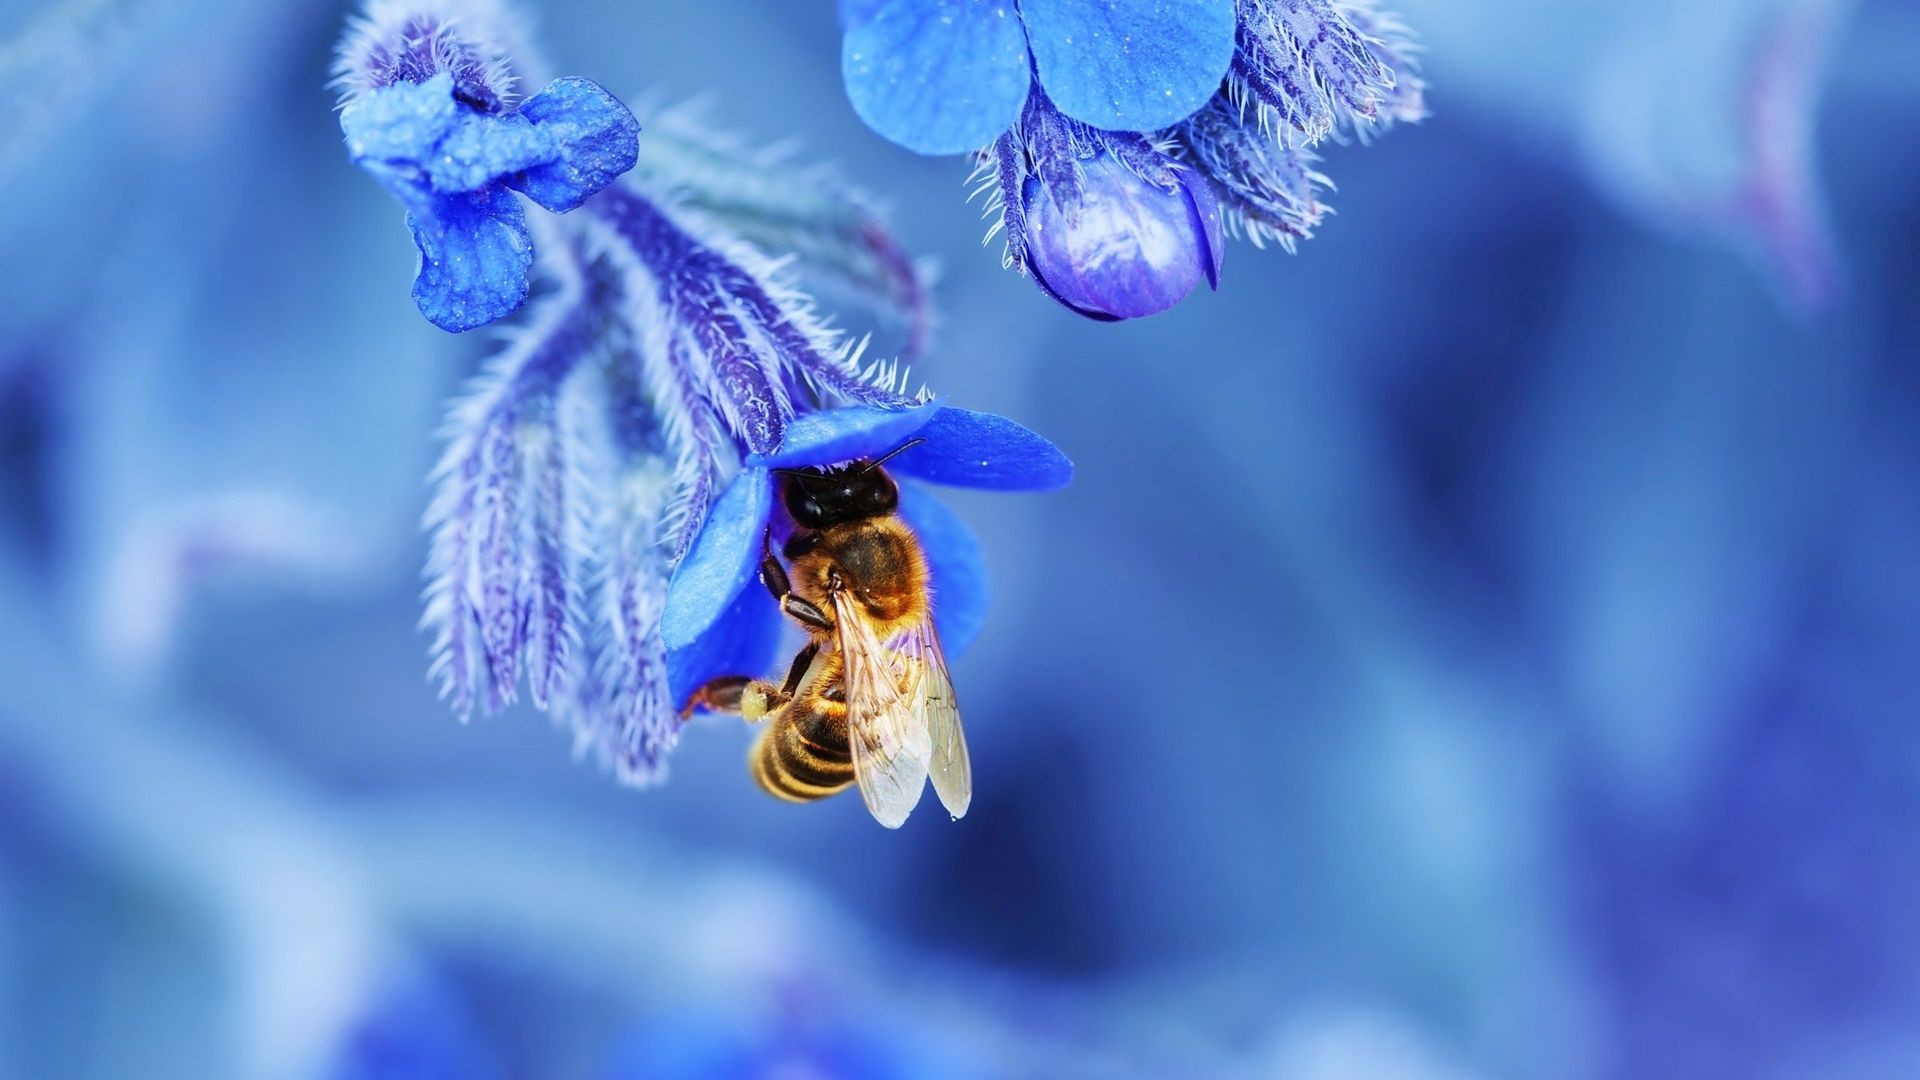 Nature Macro Depth Of Field Bees Insect Flowers Blue Blossoms Wings 1920x1080